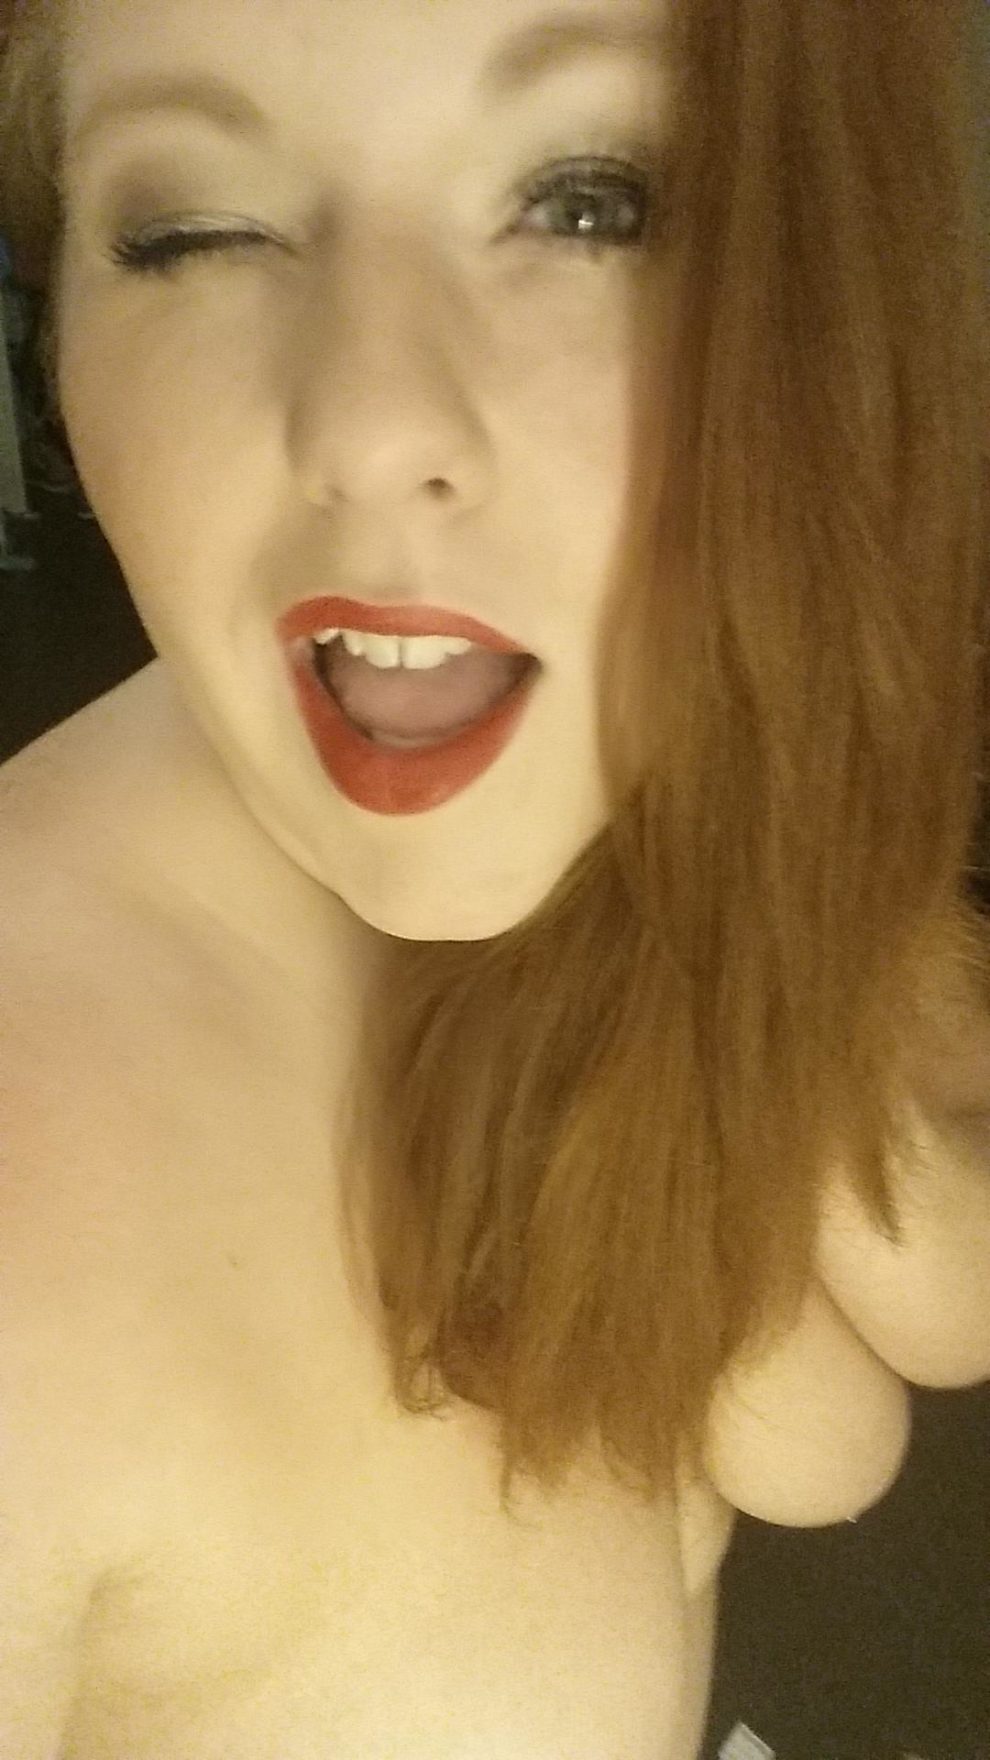 She wants to put her red lips on your dick